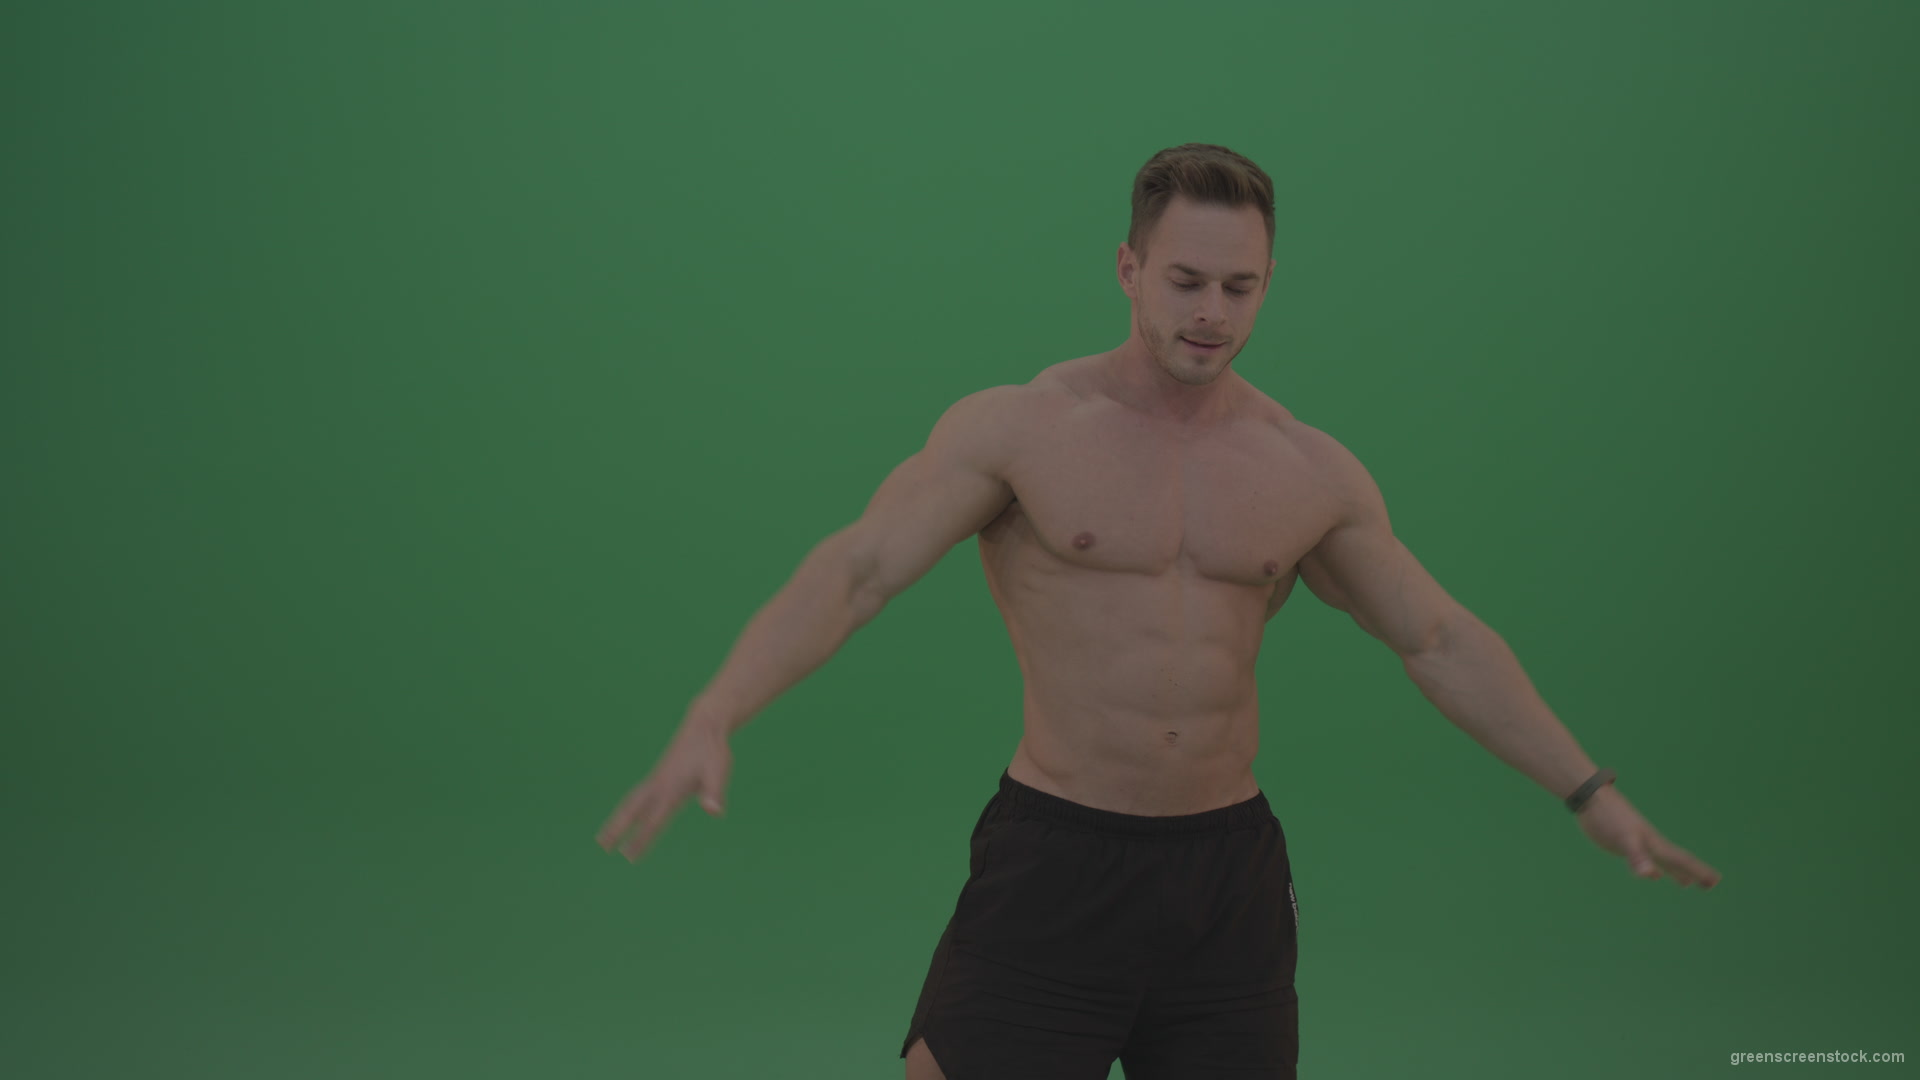 Green-Screen-Blone_Bodybuilder_Demonstrating_Front_Double_Biceps_And_Lateral_Spread_Positions_On_Green_Screen_Wall_Background_006 Green Screen Stock